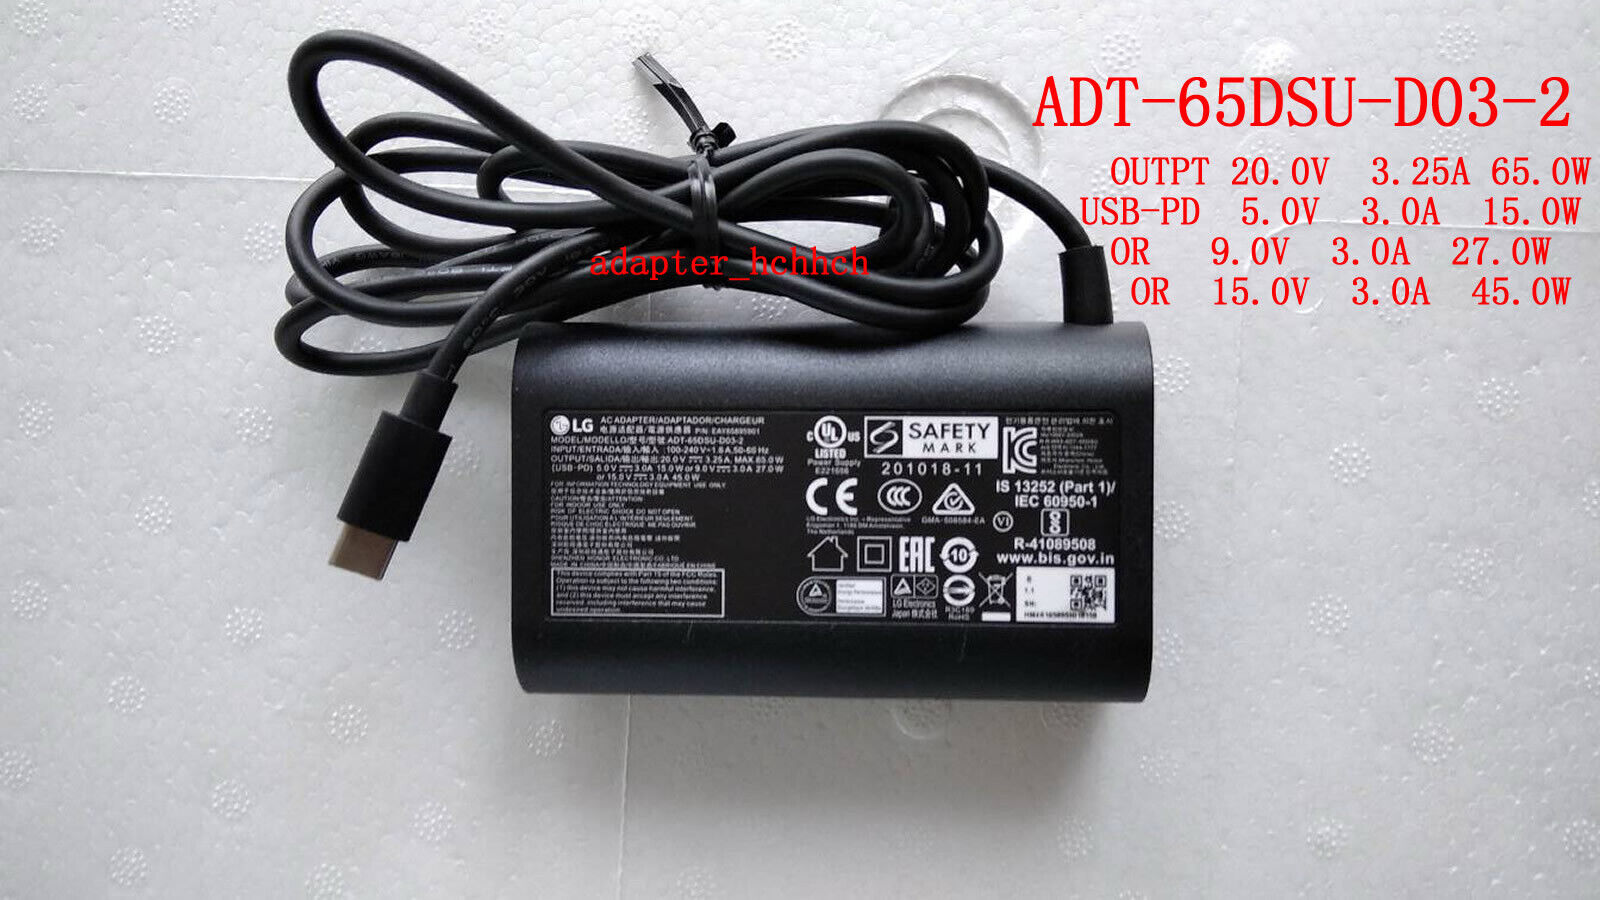 Original LG gram 17Z90P-K.AAB8U1 ADT-65DSU-D03-2 EAY65895901 USB-C AC/DC Adapter Country/Region of Manufacture China Cu